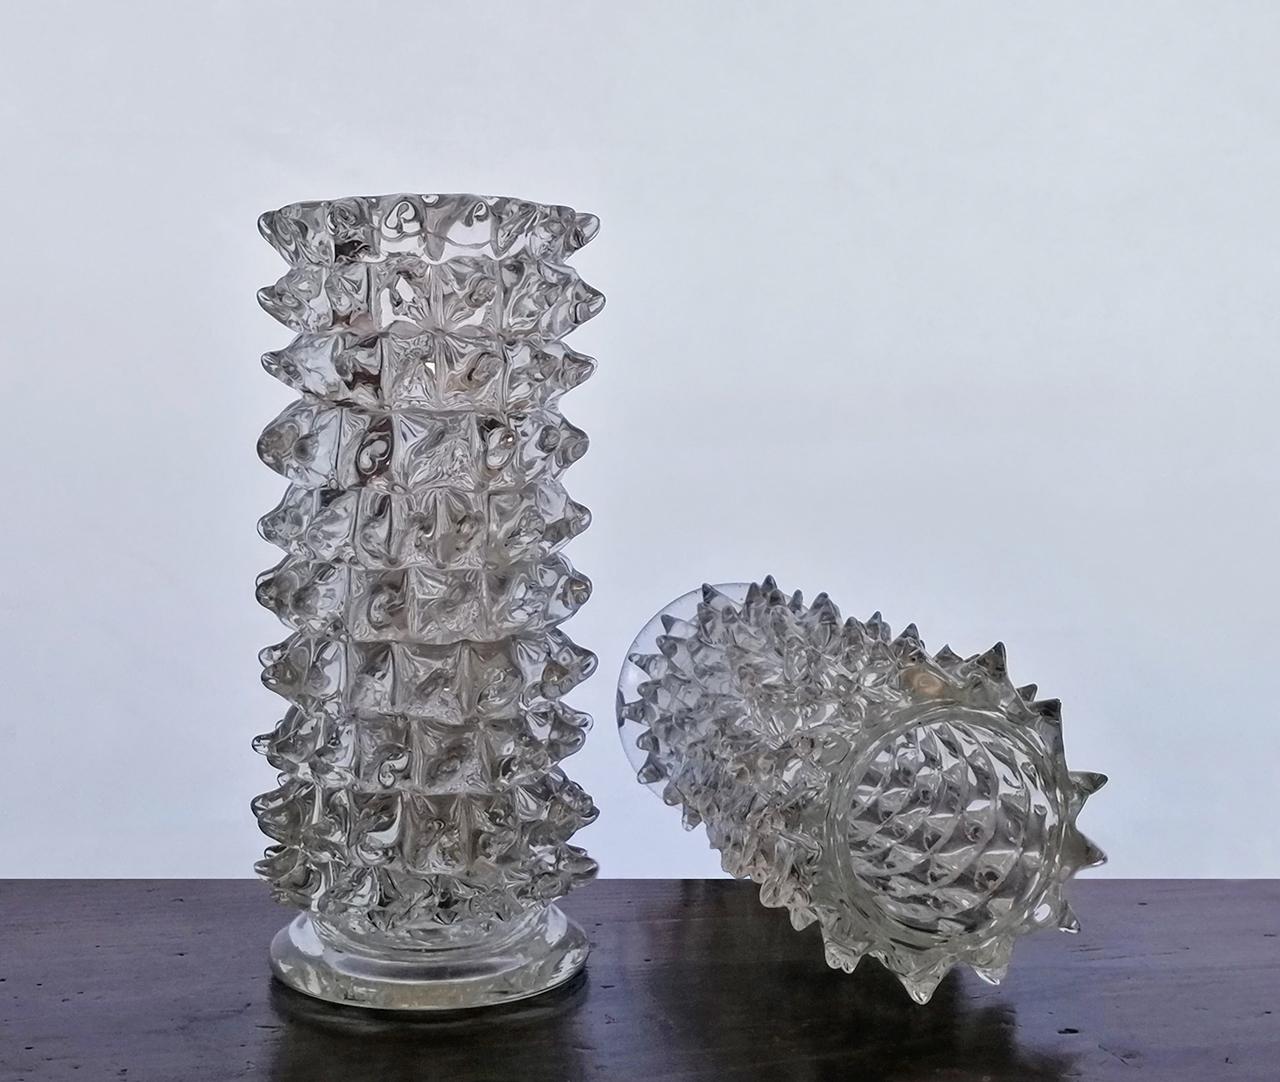 Two cylindrical glass vases produced by the famous Barovier manufacture of Murano in the 1940s.
This type of vase is called “rostrato” due to its beak-shaped spikes.
The vases are in good condition with a few minor chips on thespikes, two or three